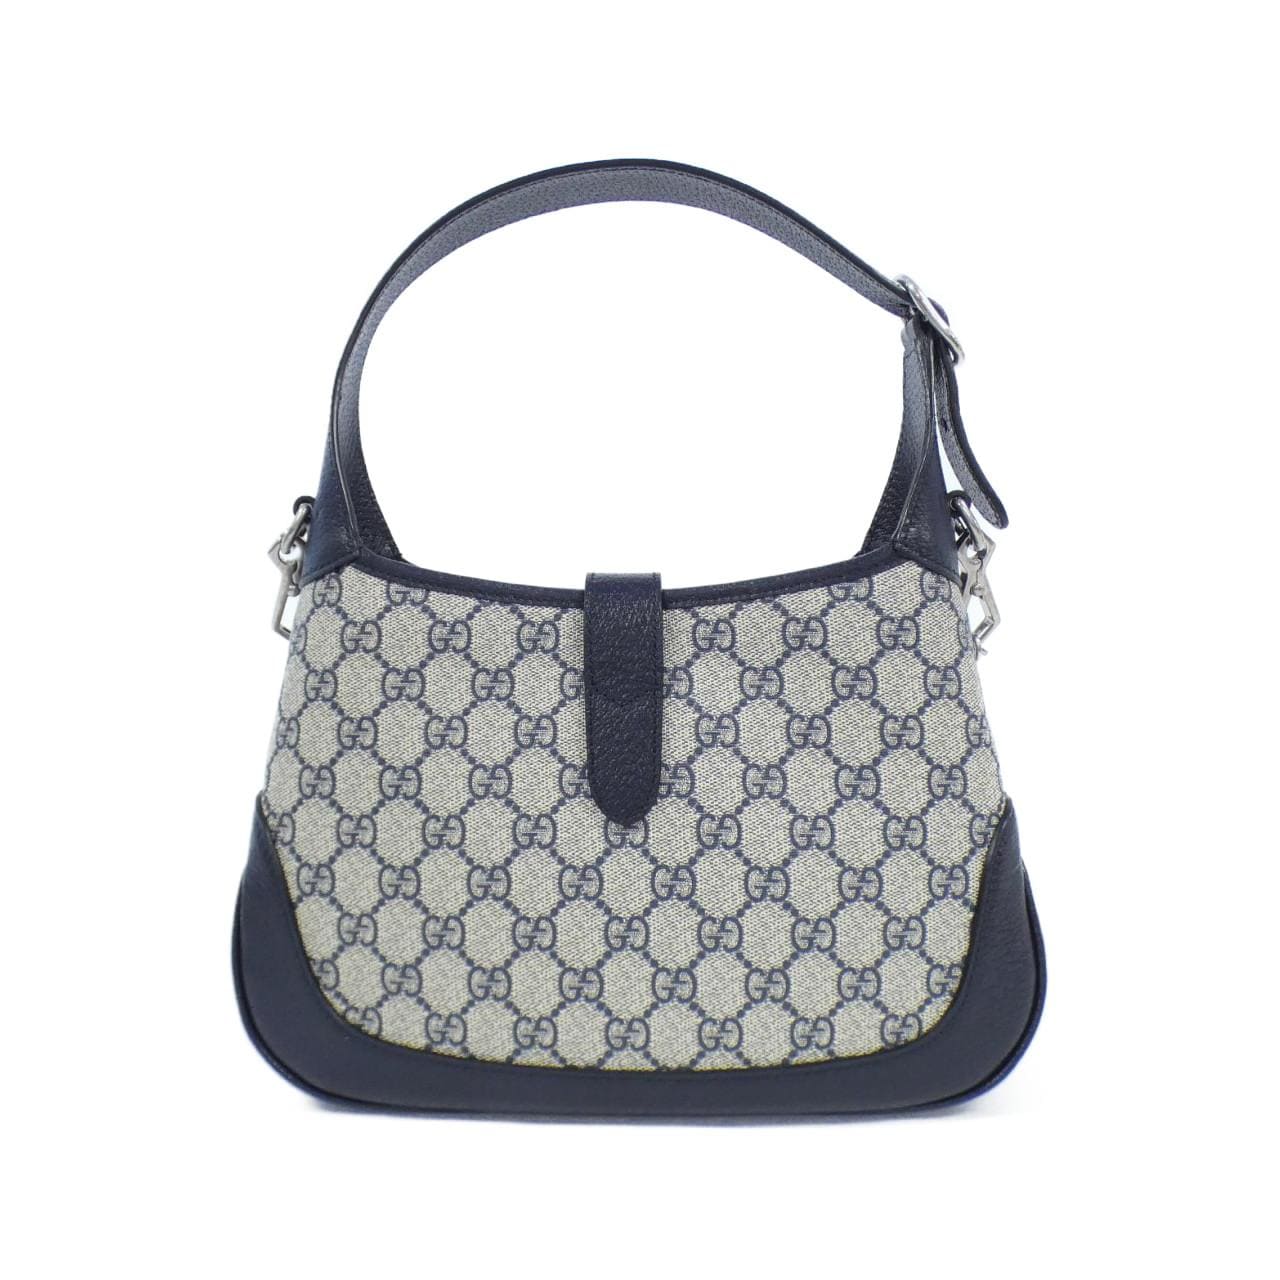 GUCCI JACKIE 1961 678843 96IWN肩背包